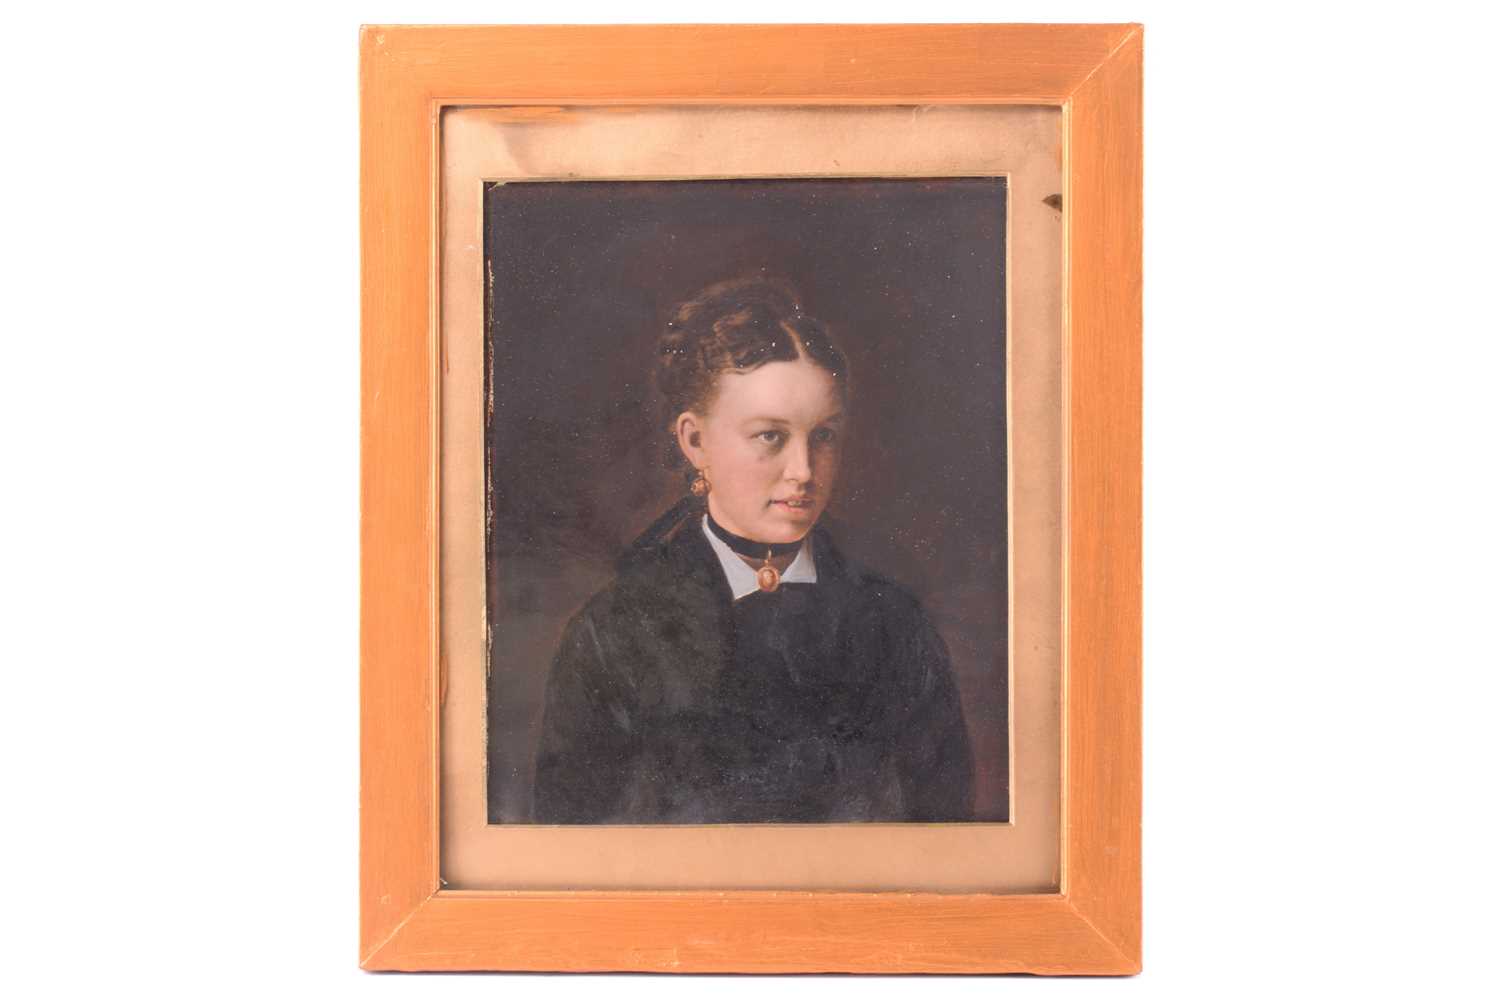 19th century British School, Portrait of a young widow, unsigned, oil on board, 32 x 27.5 cm, framed